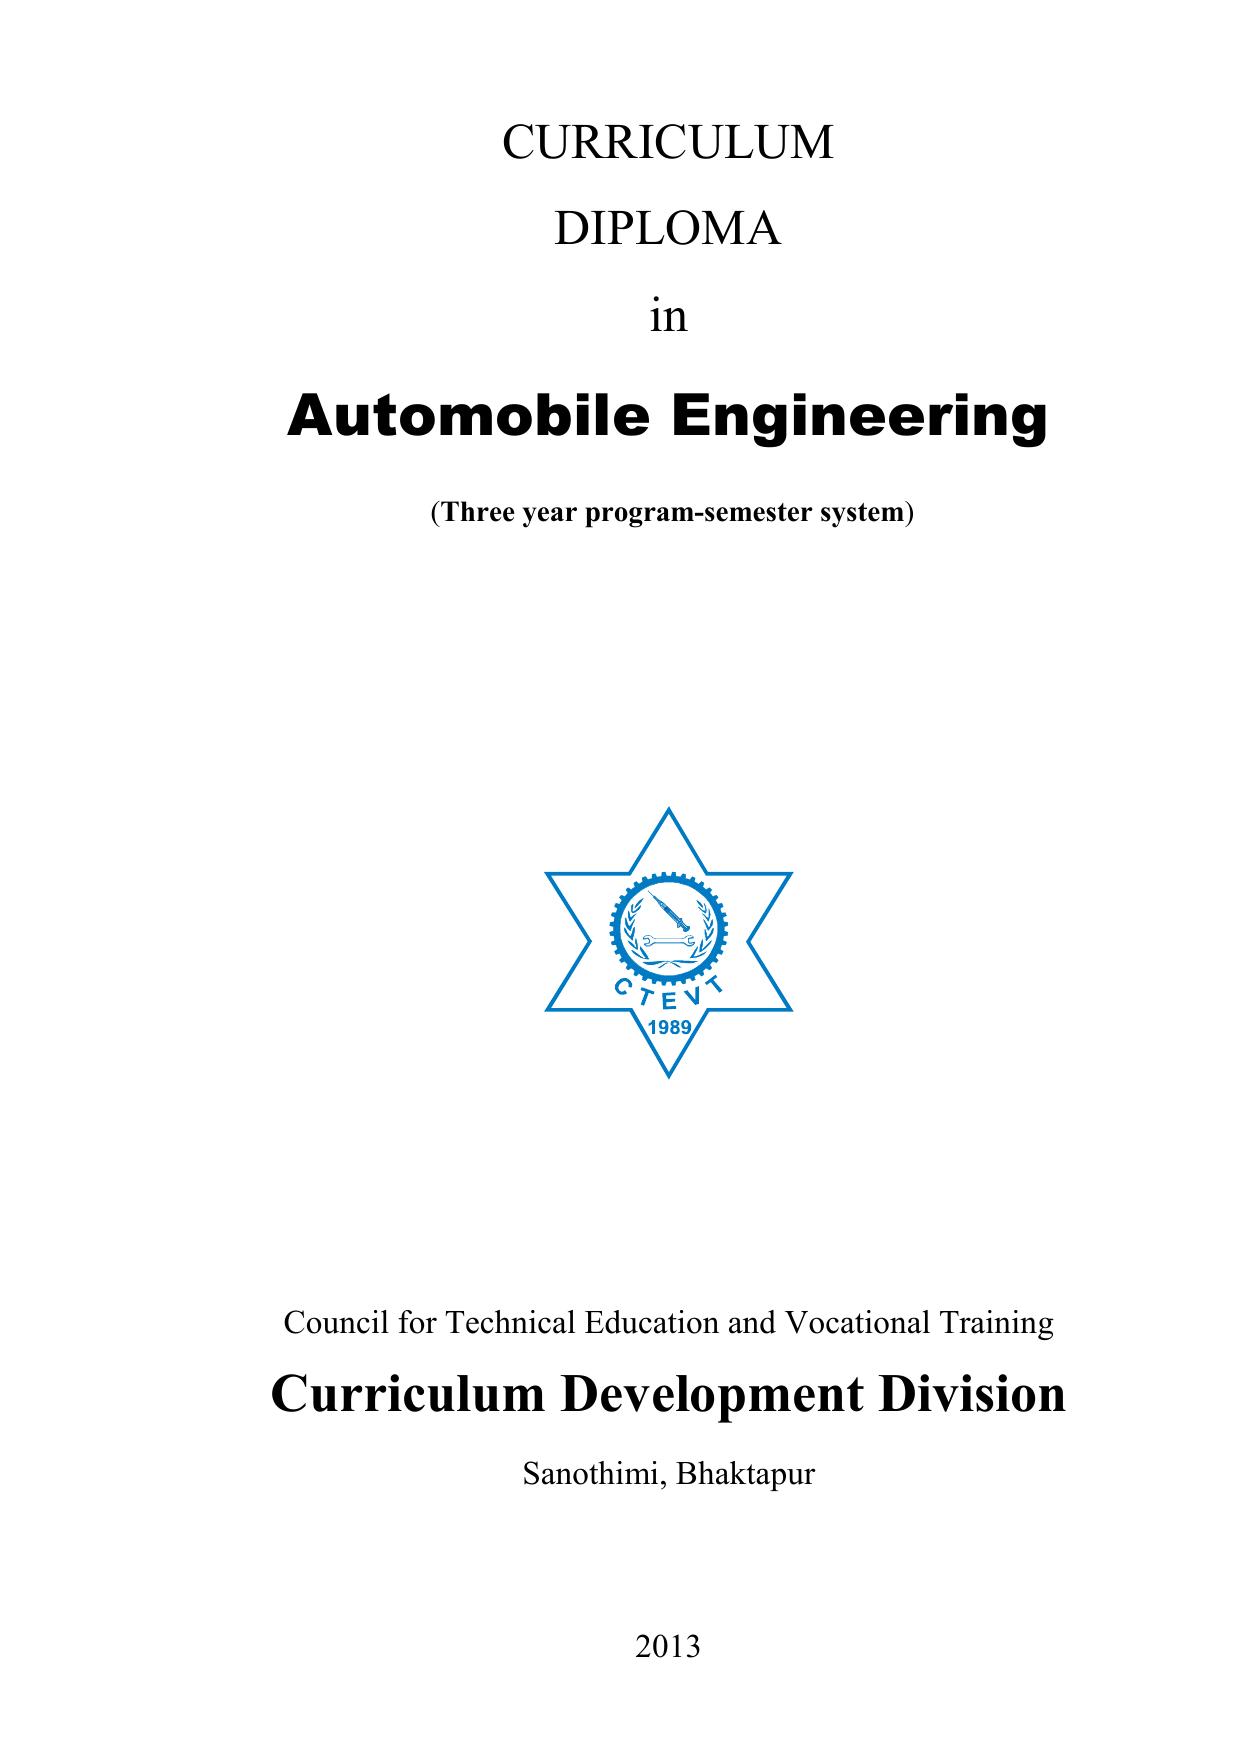 Diploma in Automobile Engineering, 2013